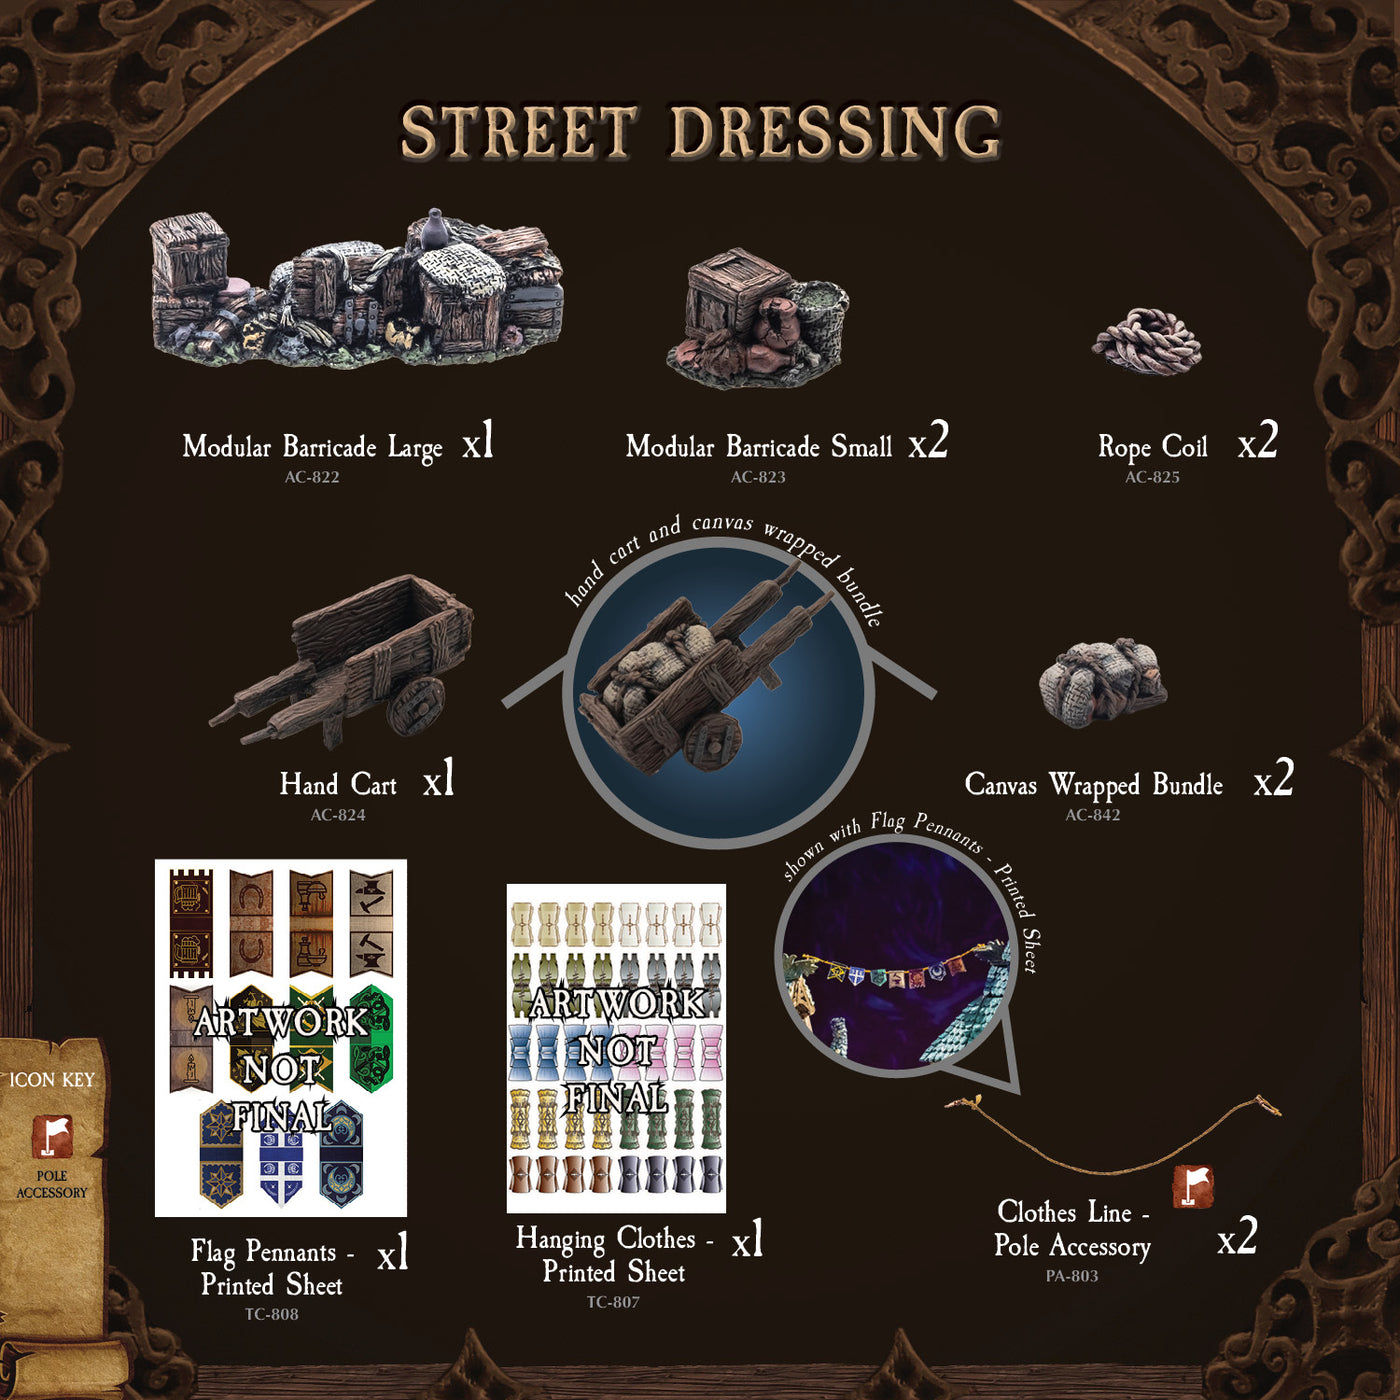 Lowtown Street Dressing (Painted)